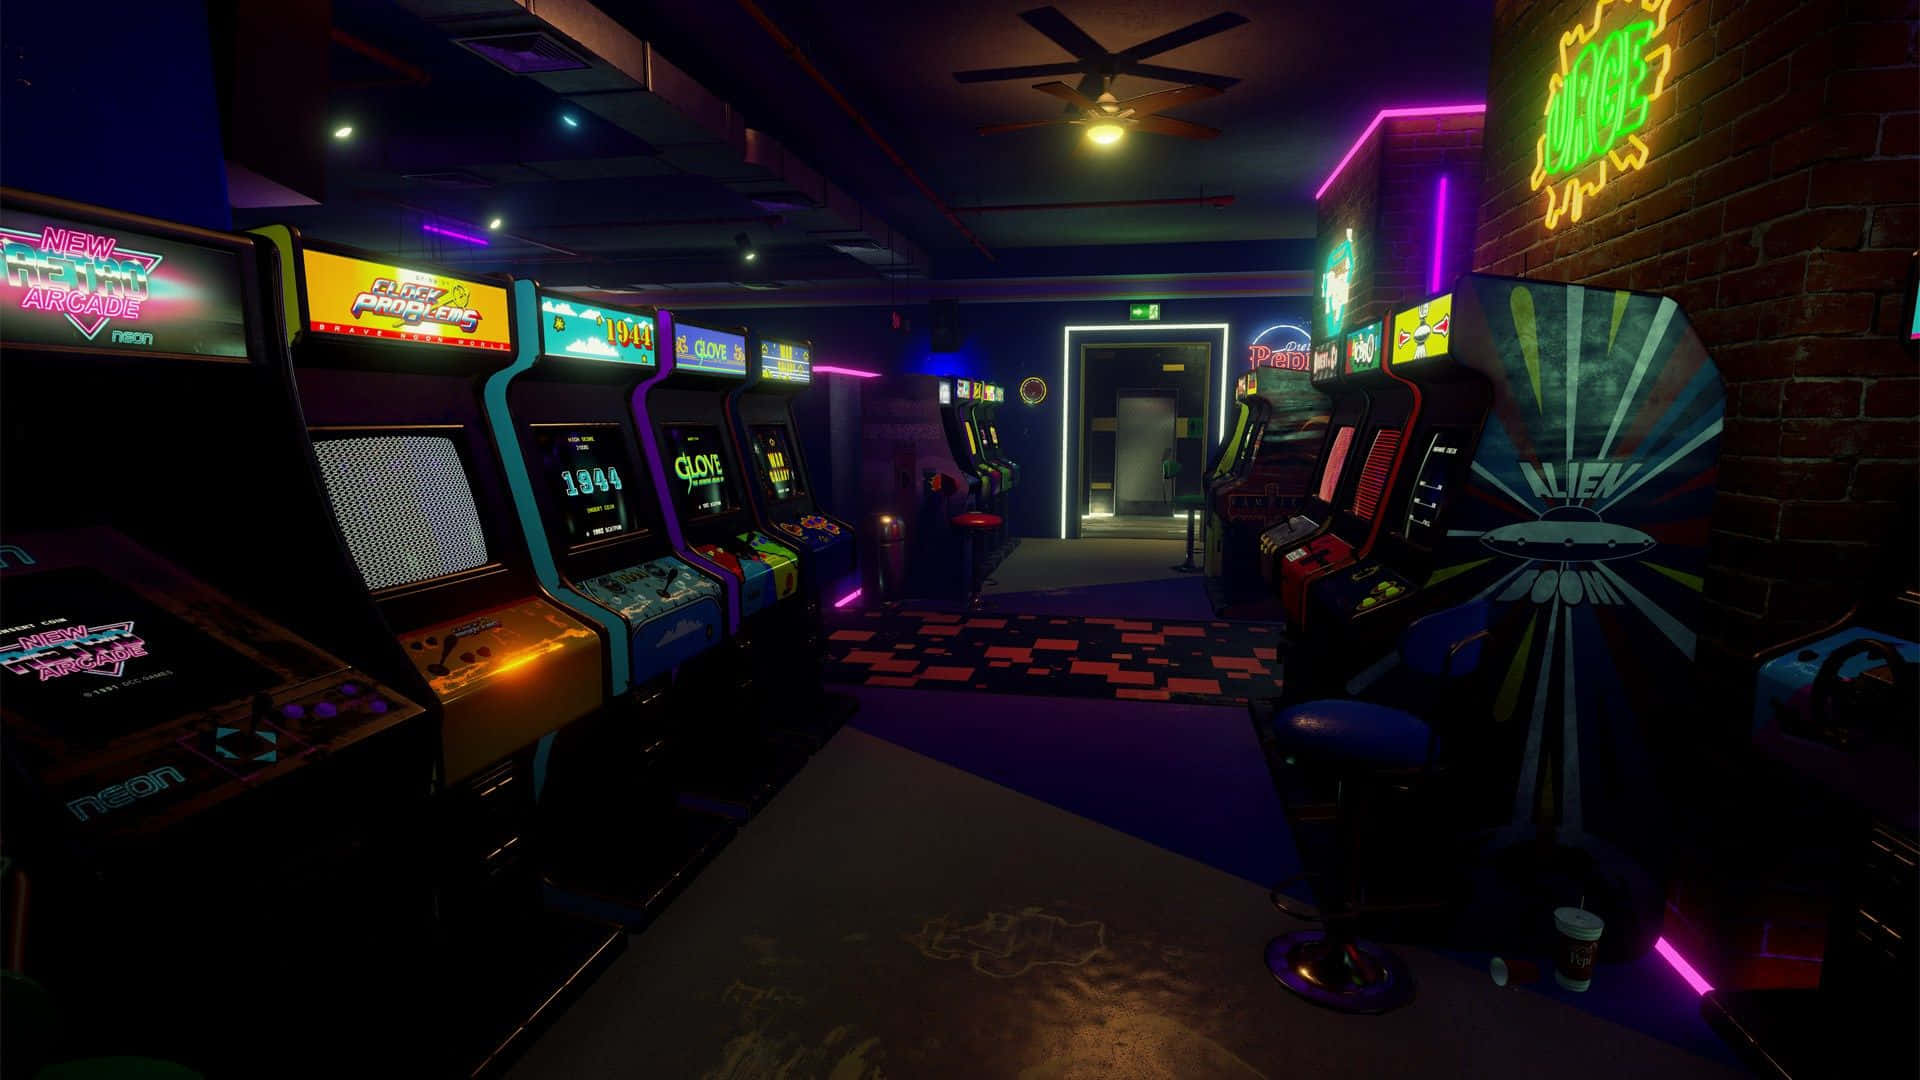 Get the Best Score of Your Life at the Arcade